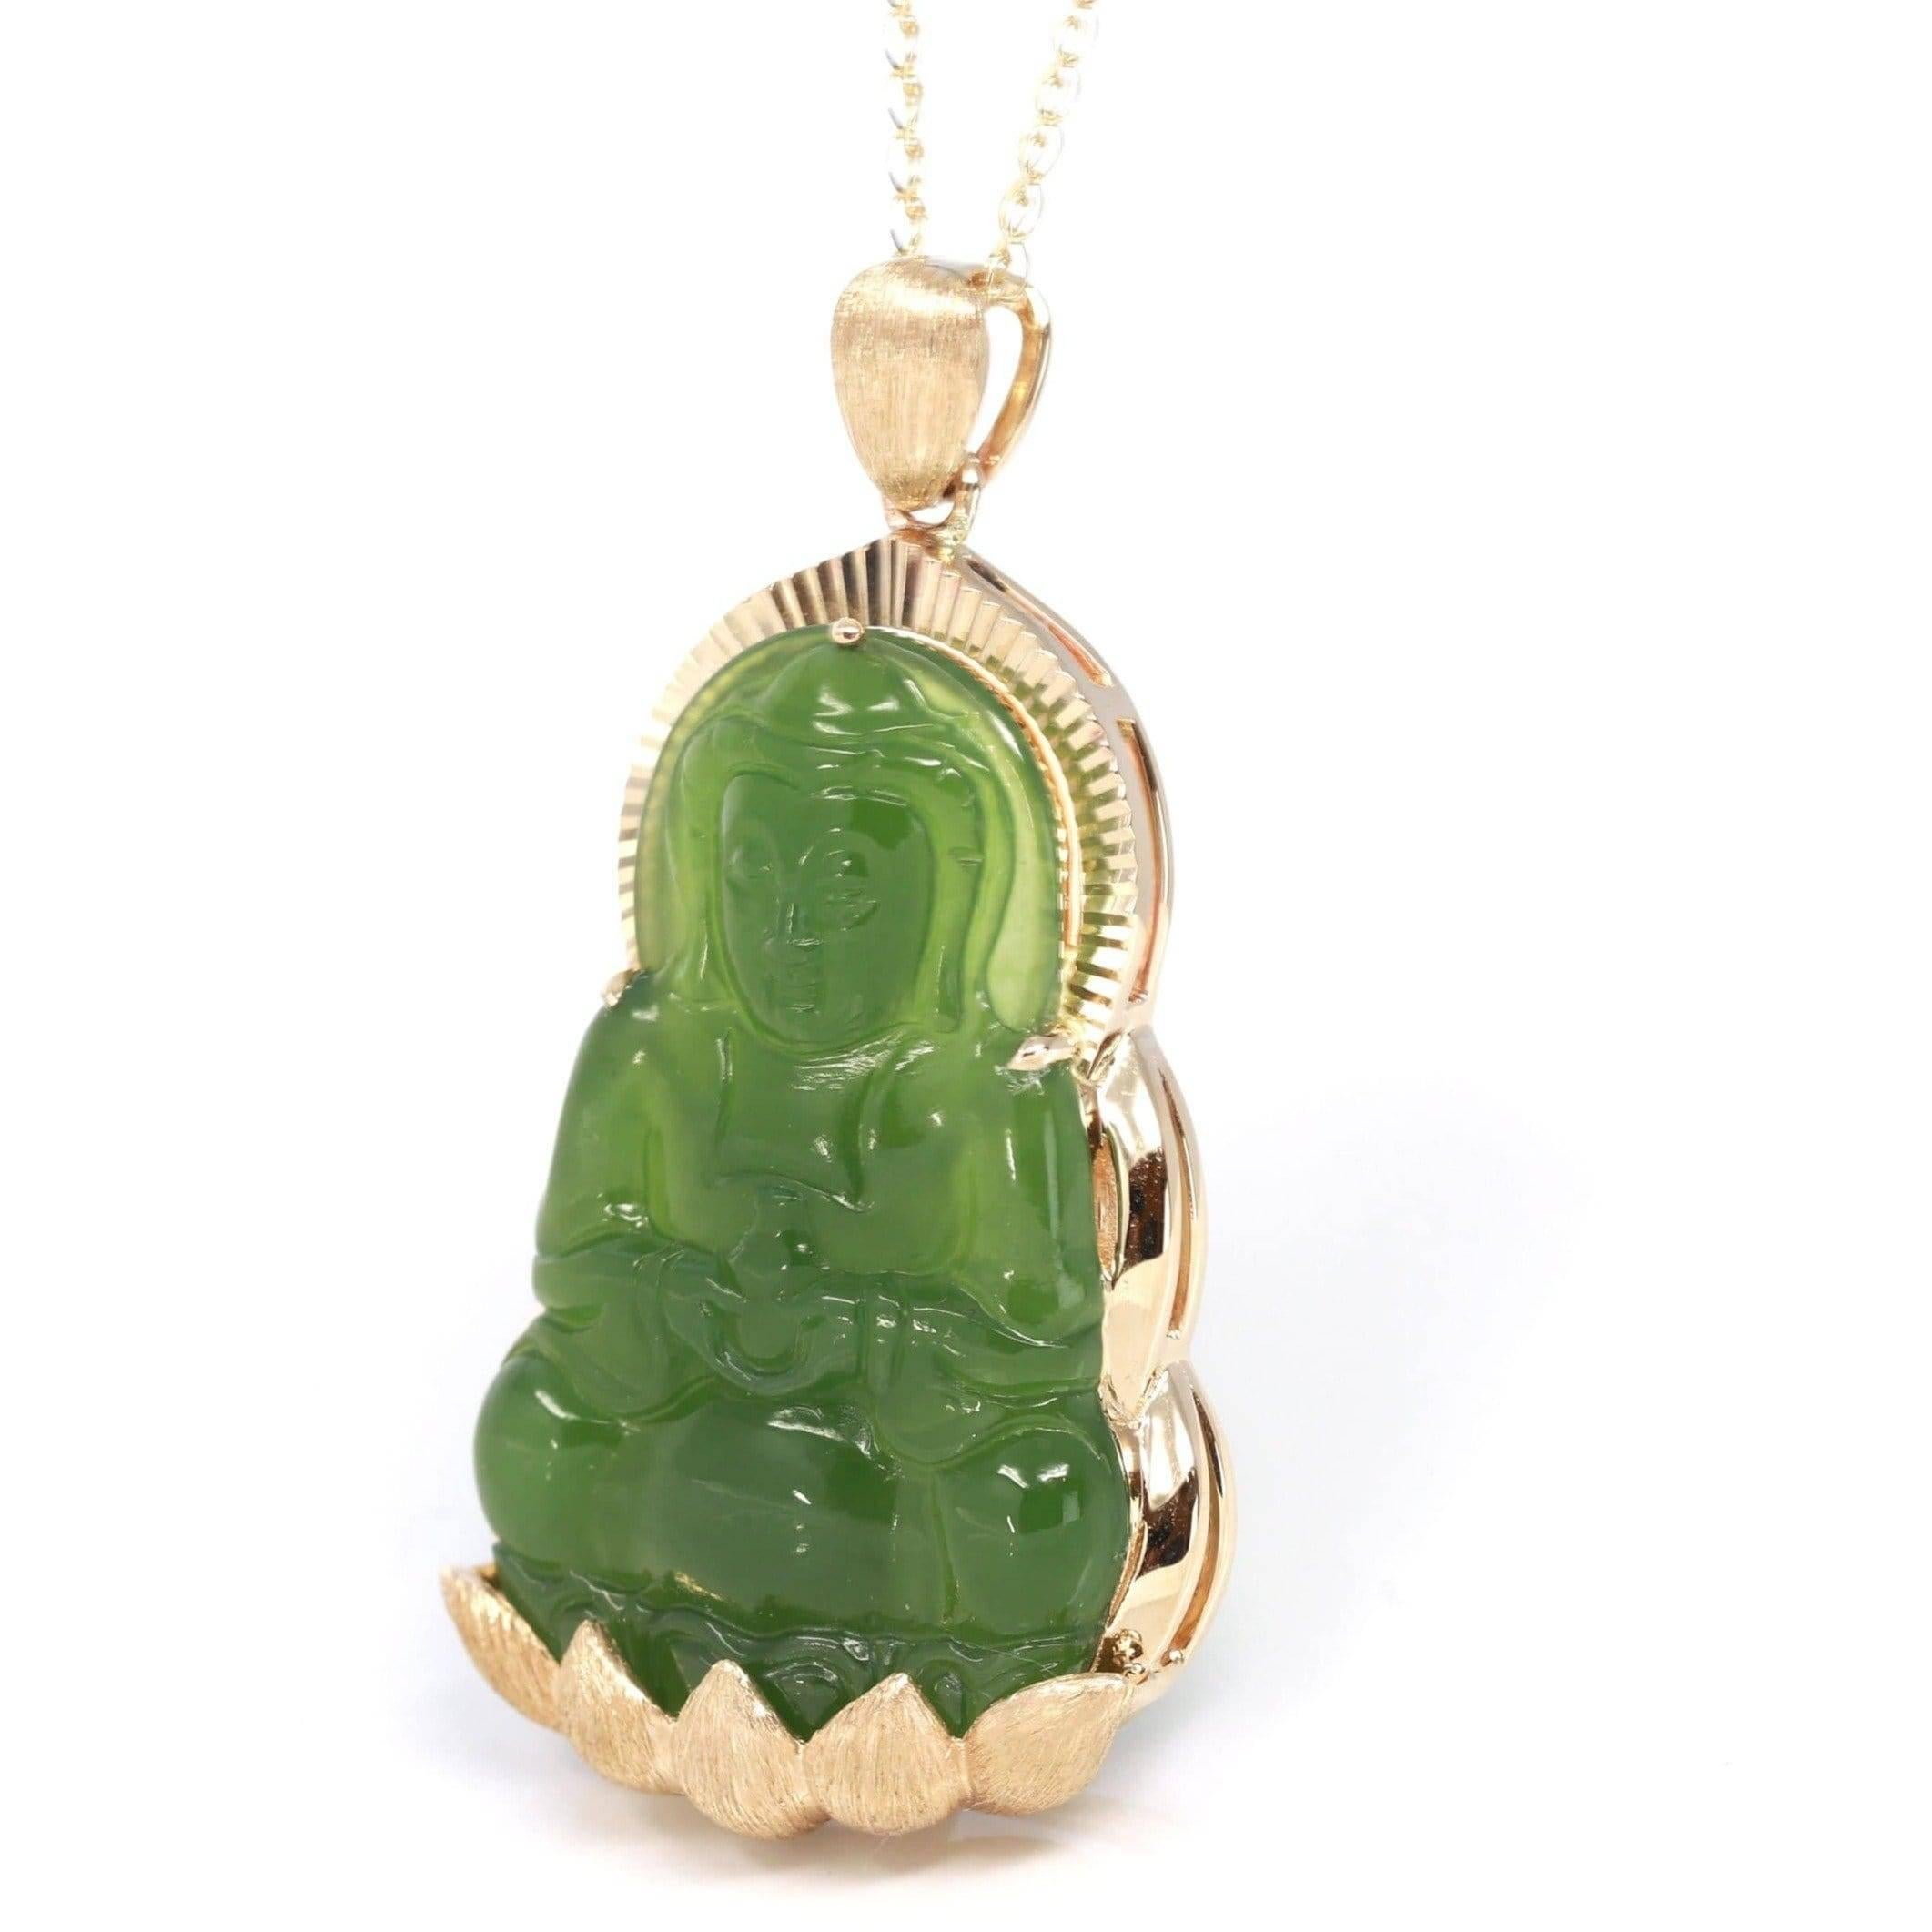 * INTRODUCTION----- 14k Yellow Gold Genuine Nephrite Green Jade Guan Yin Pendant Necklace. The Guan Yin looks so kind and powerful with great hand carving. Every detail and angle are so perfect. It's an expression like bless your all and kind to